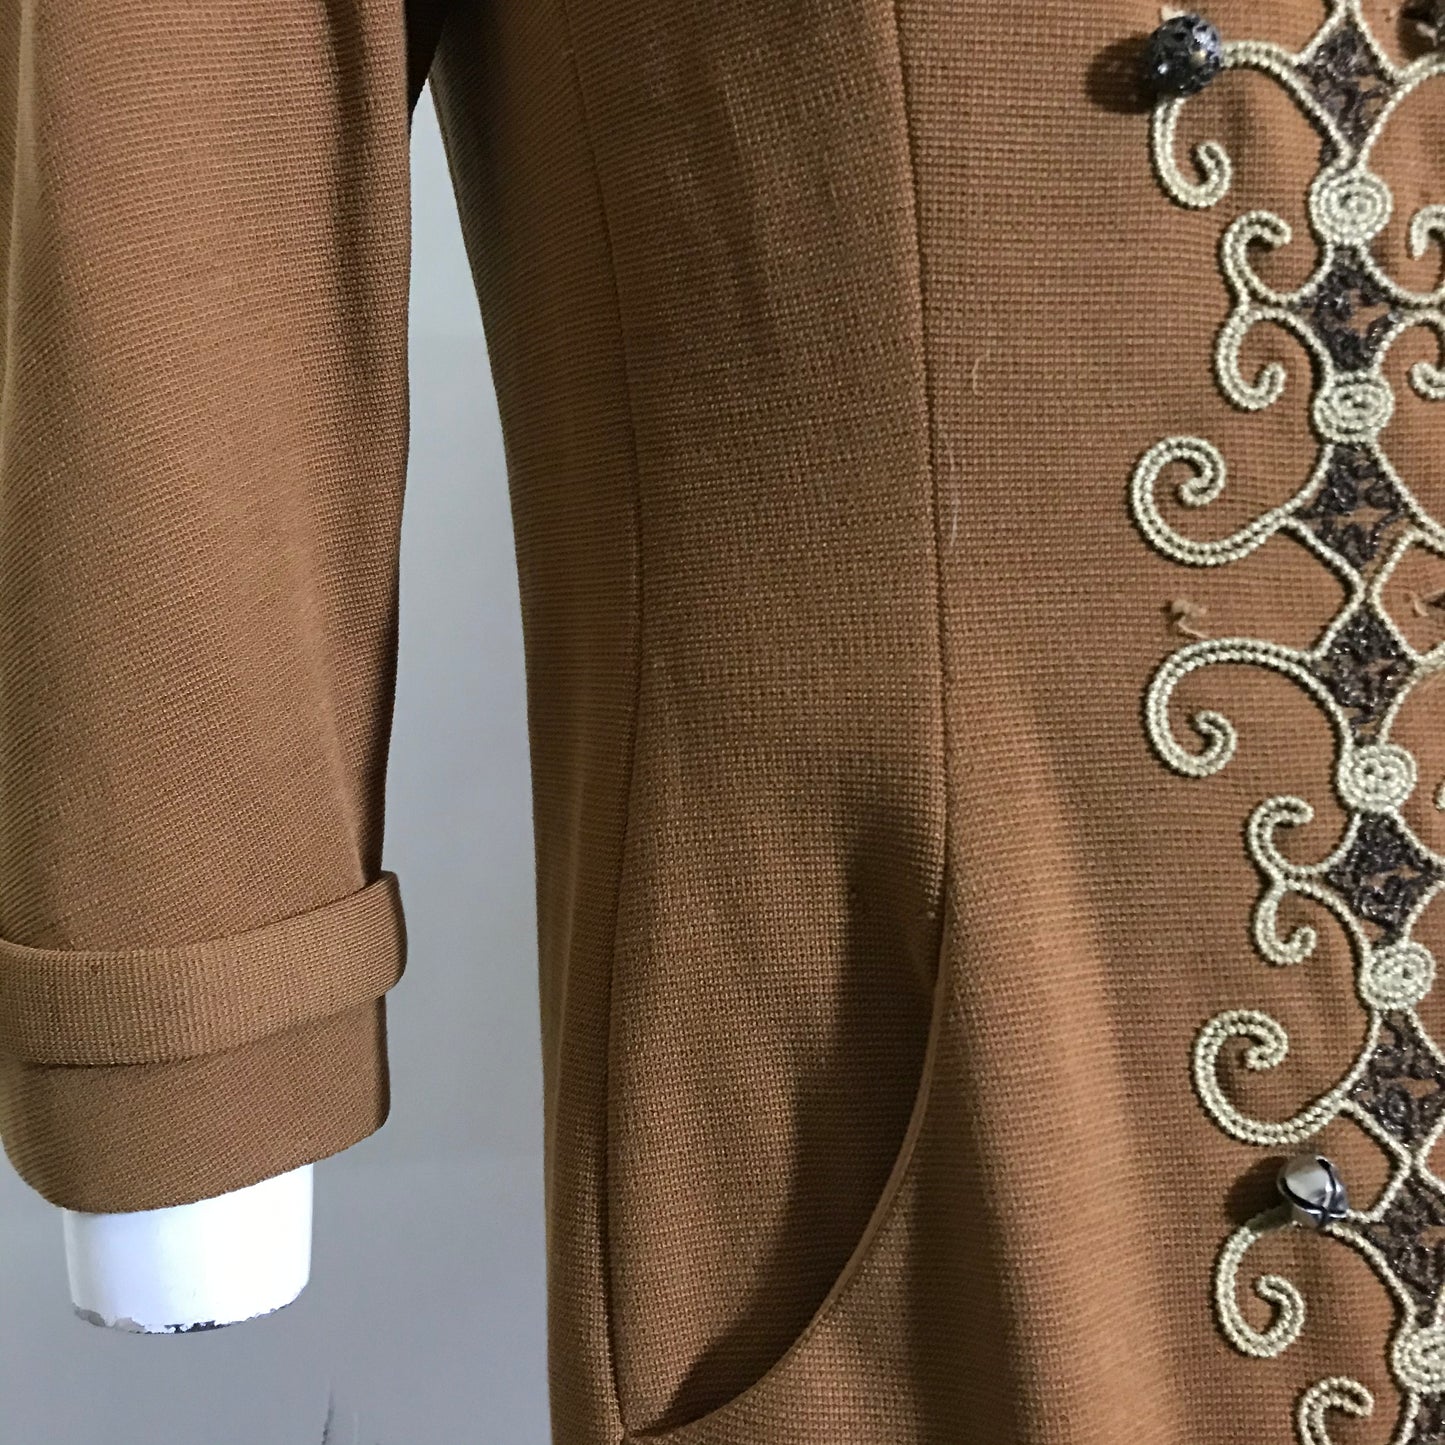 Cinnamon Knit Wool Knit Shift Dress with Soutache and Beads circa 1960s